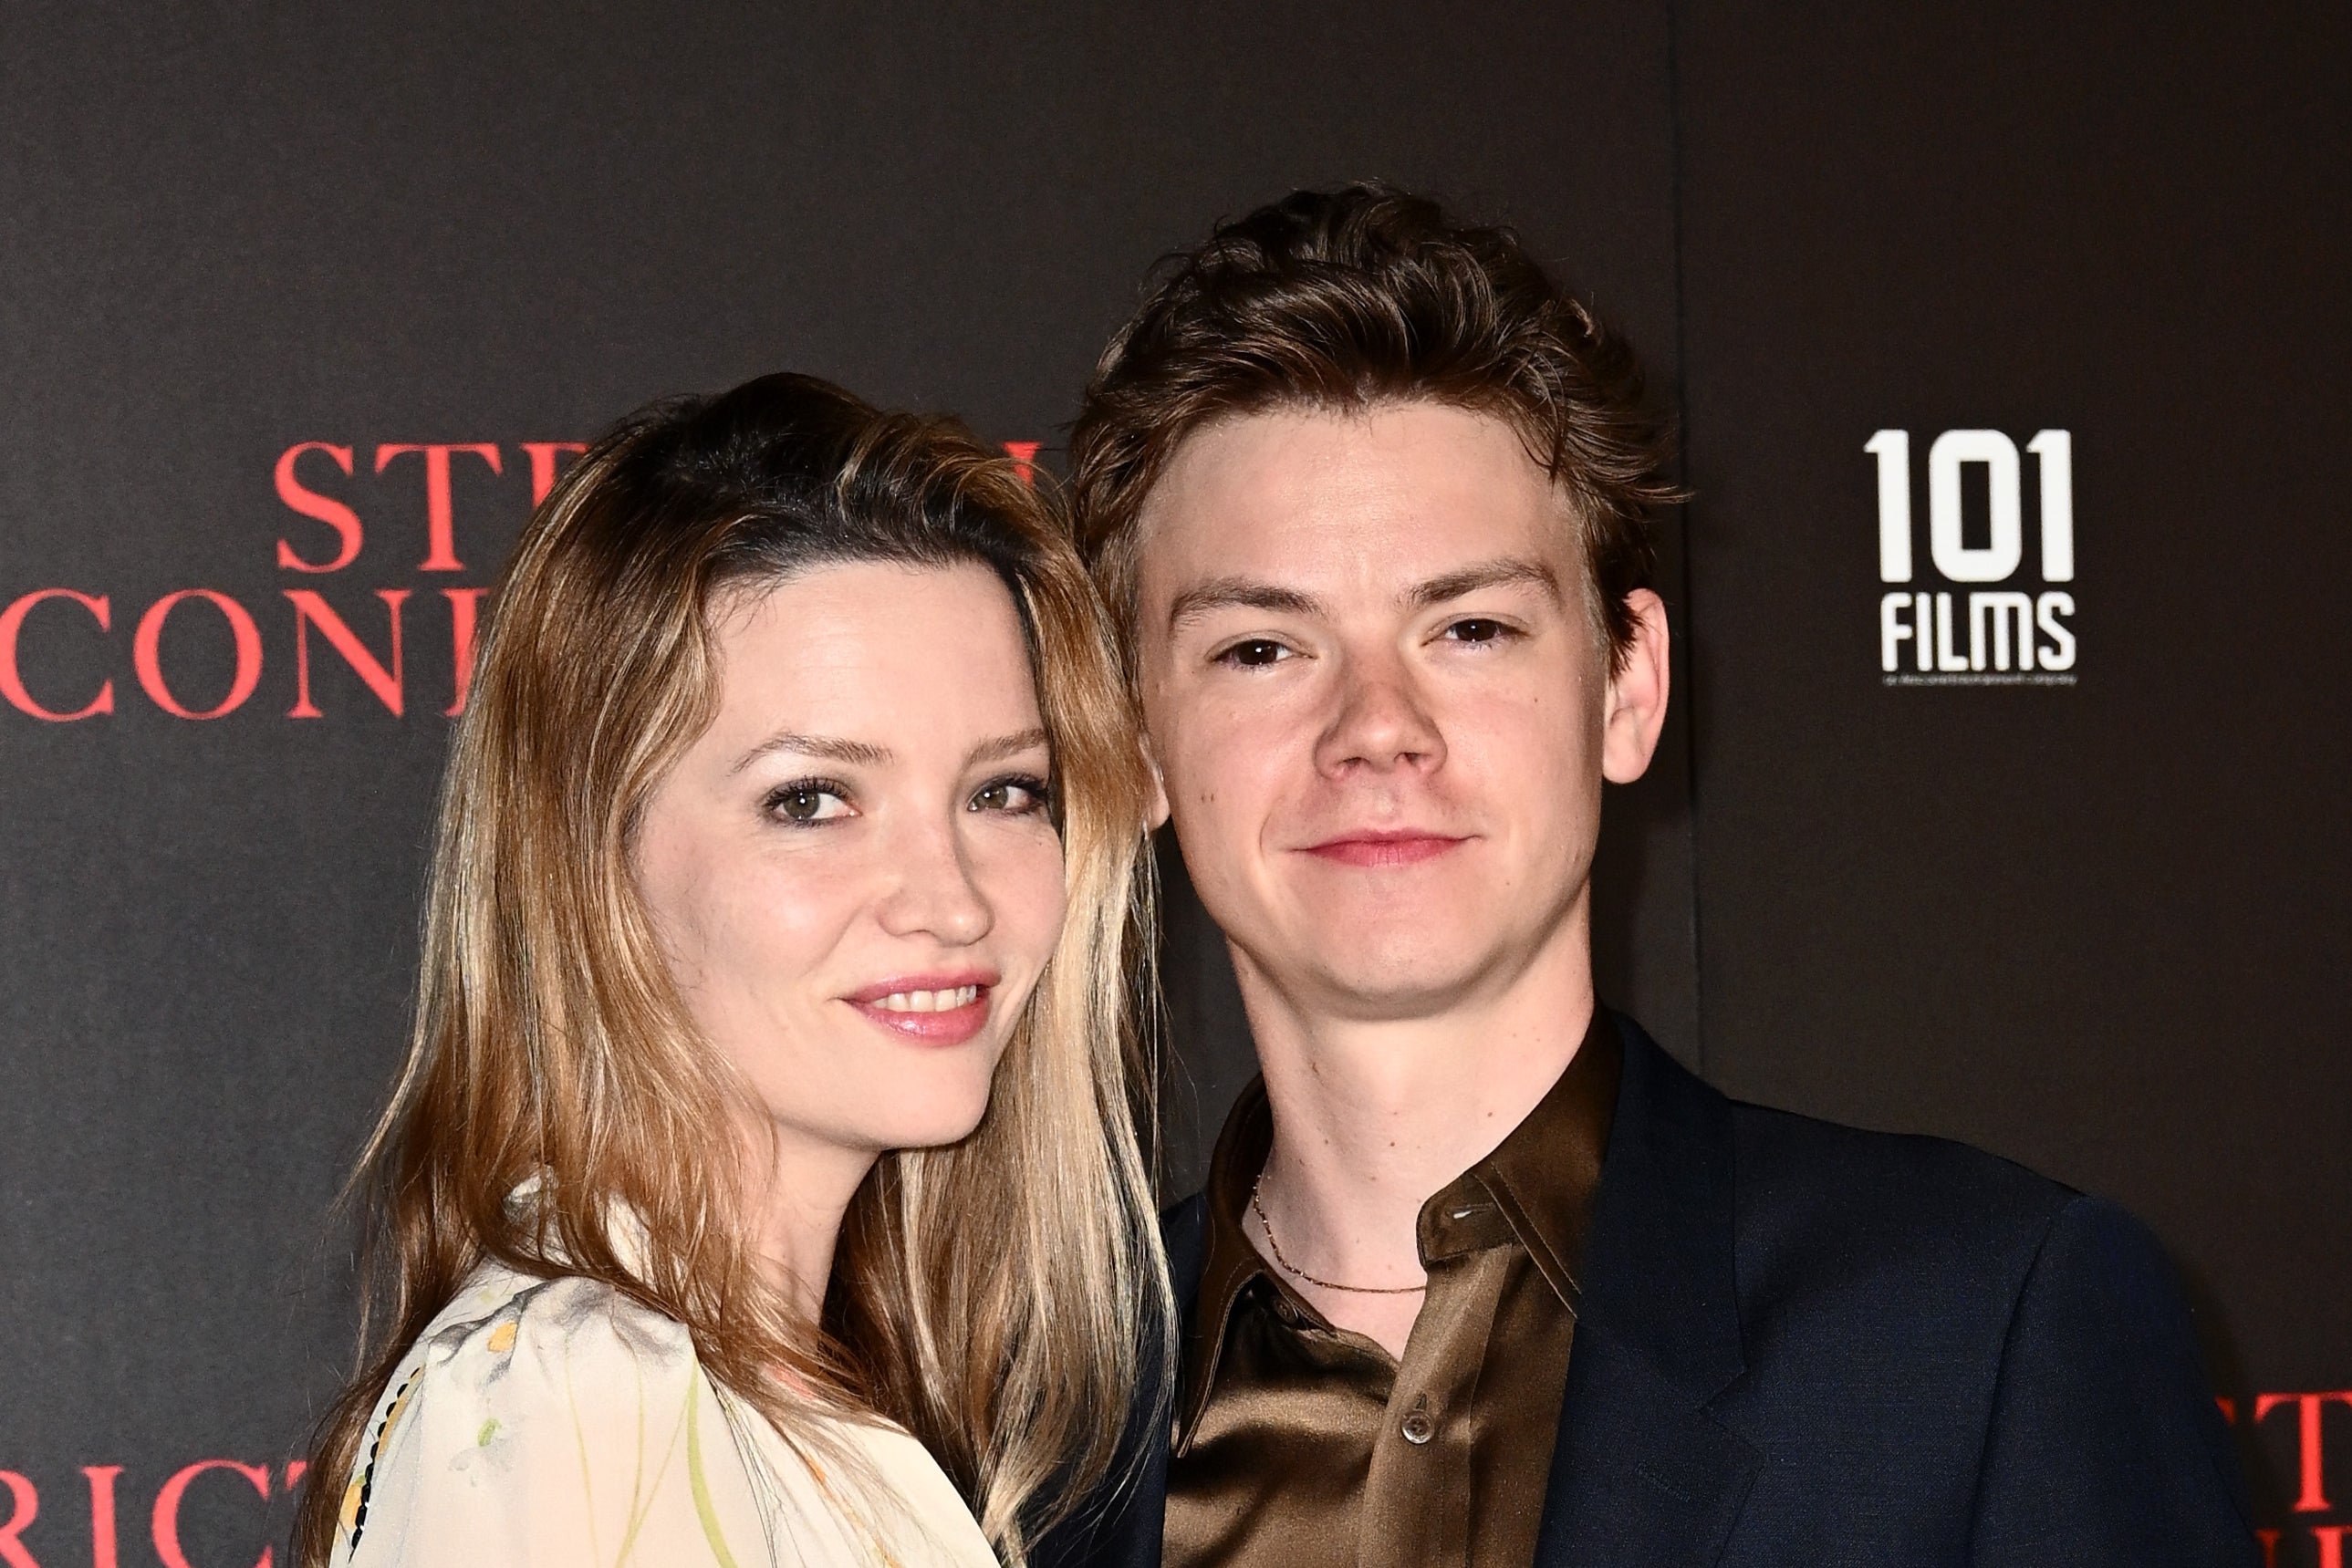 Brodie-Sangster said ‘Love is all around’ in engagement announcement